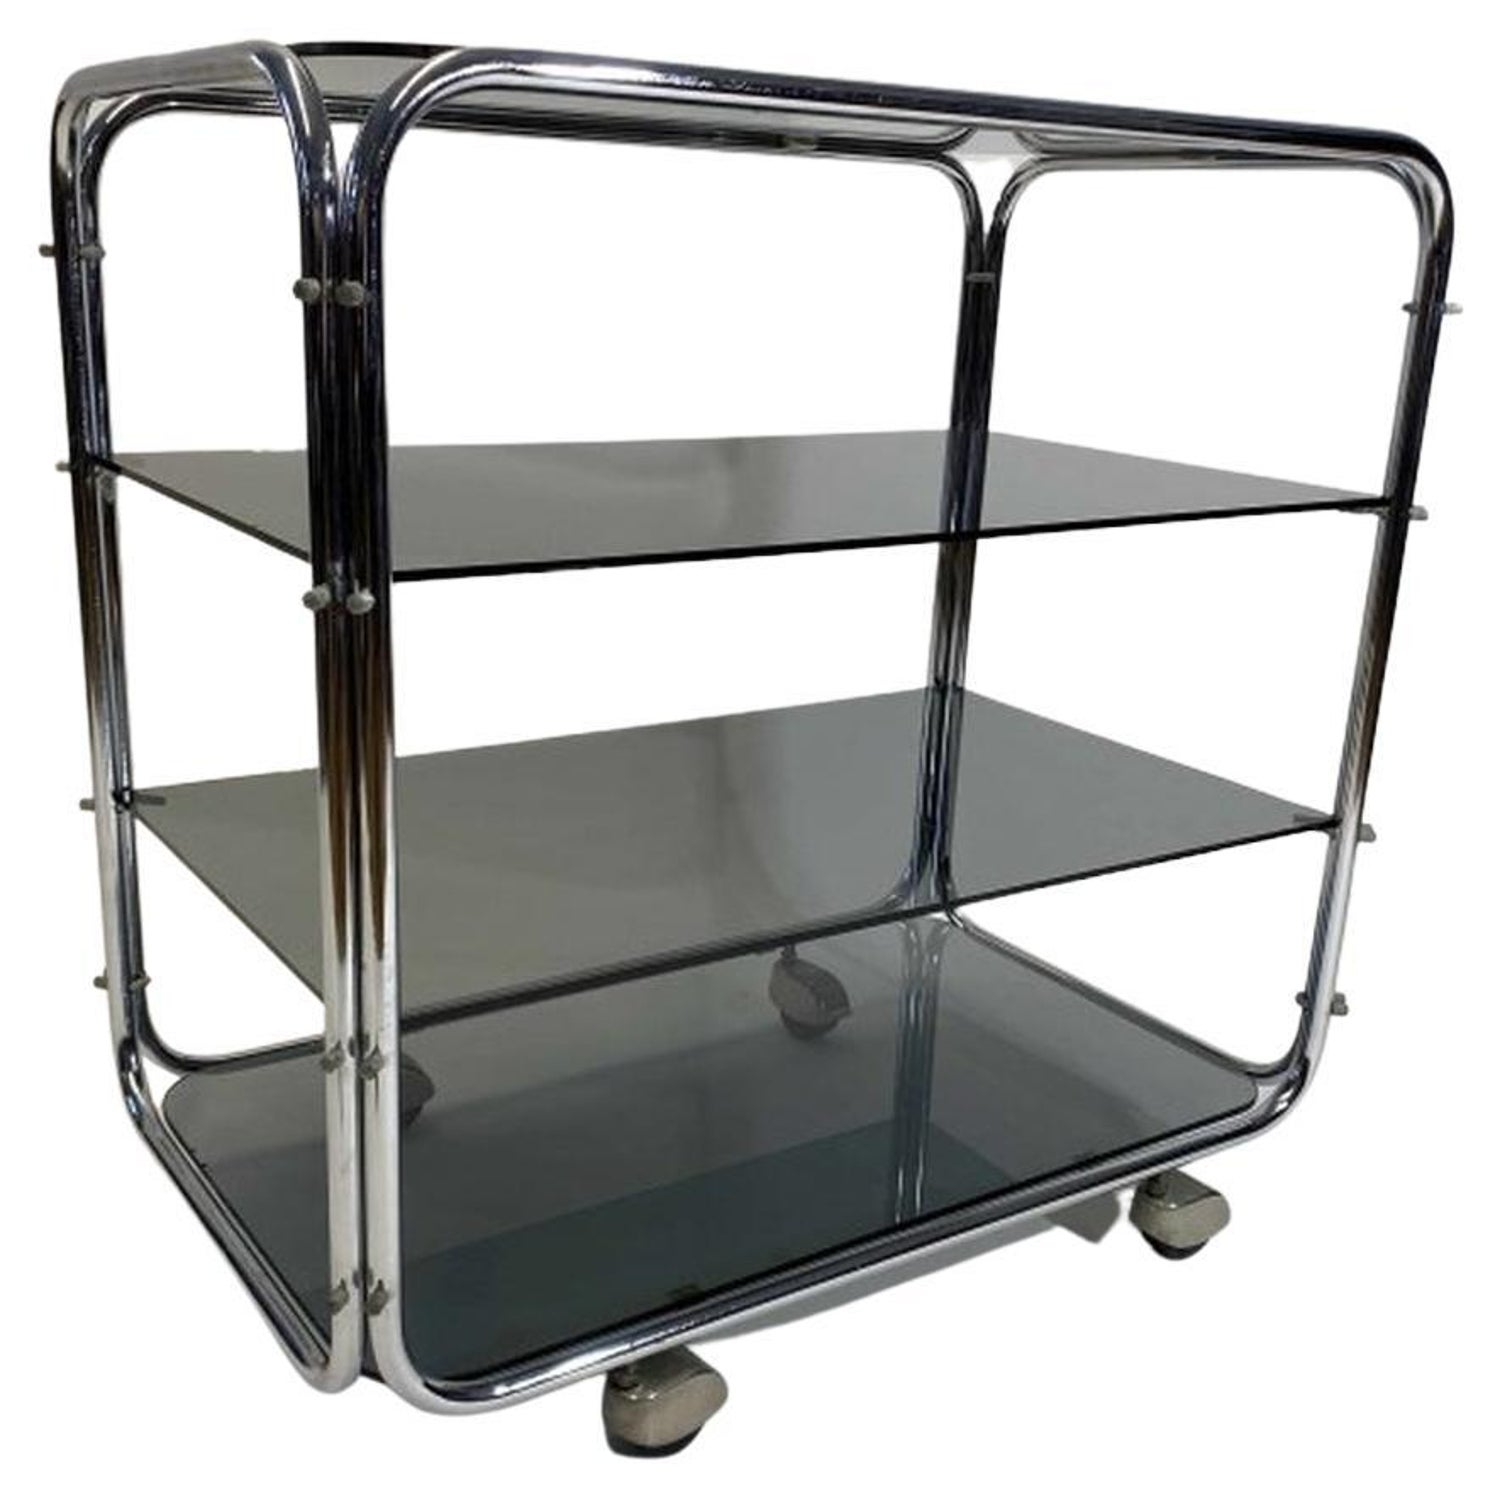 Bauhaus Tubular Trolley with Black Glass Tops For Sale at 1stDibs